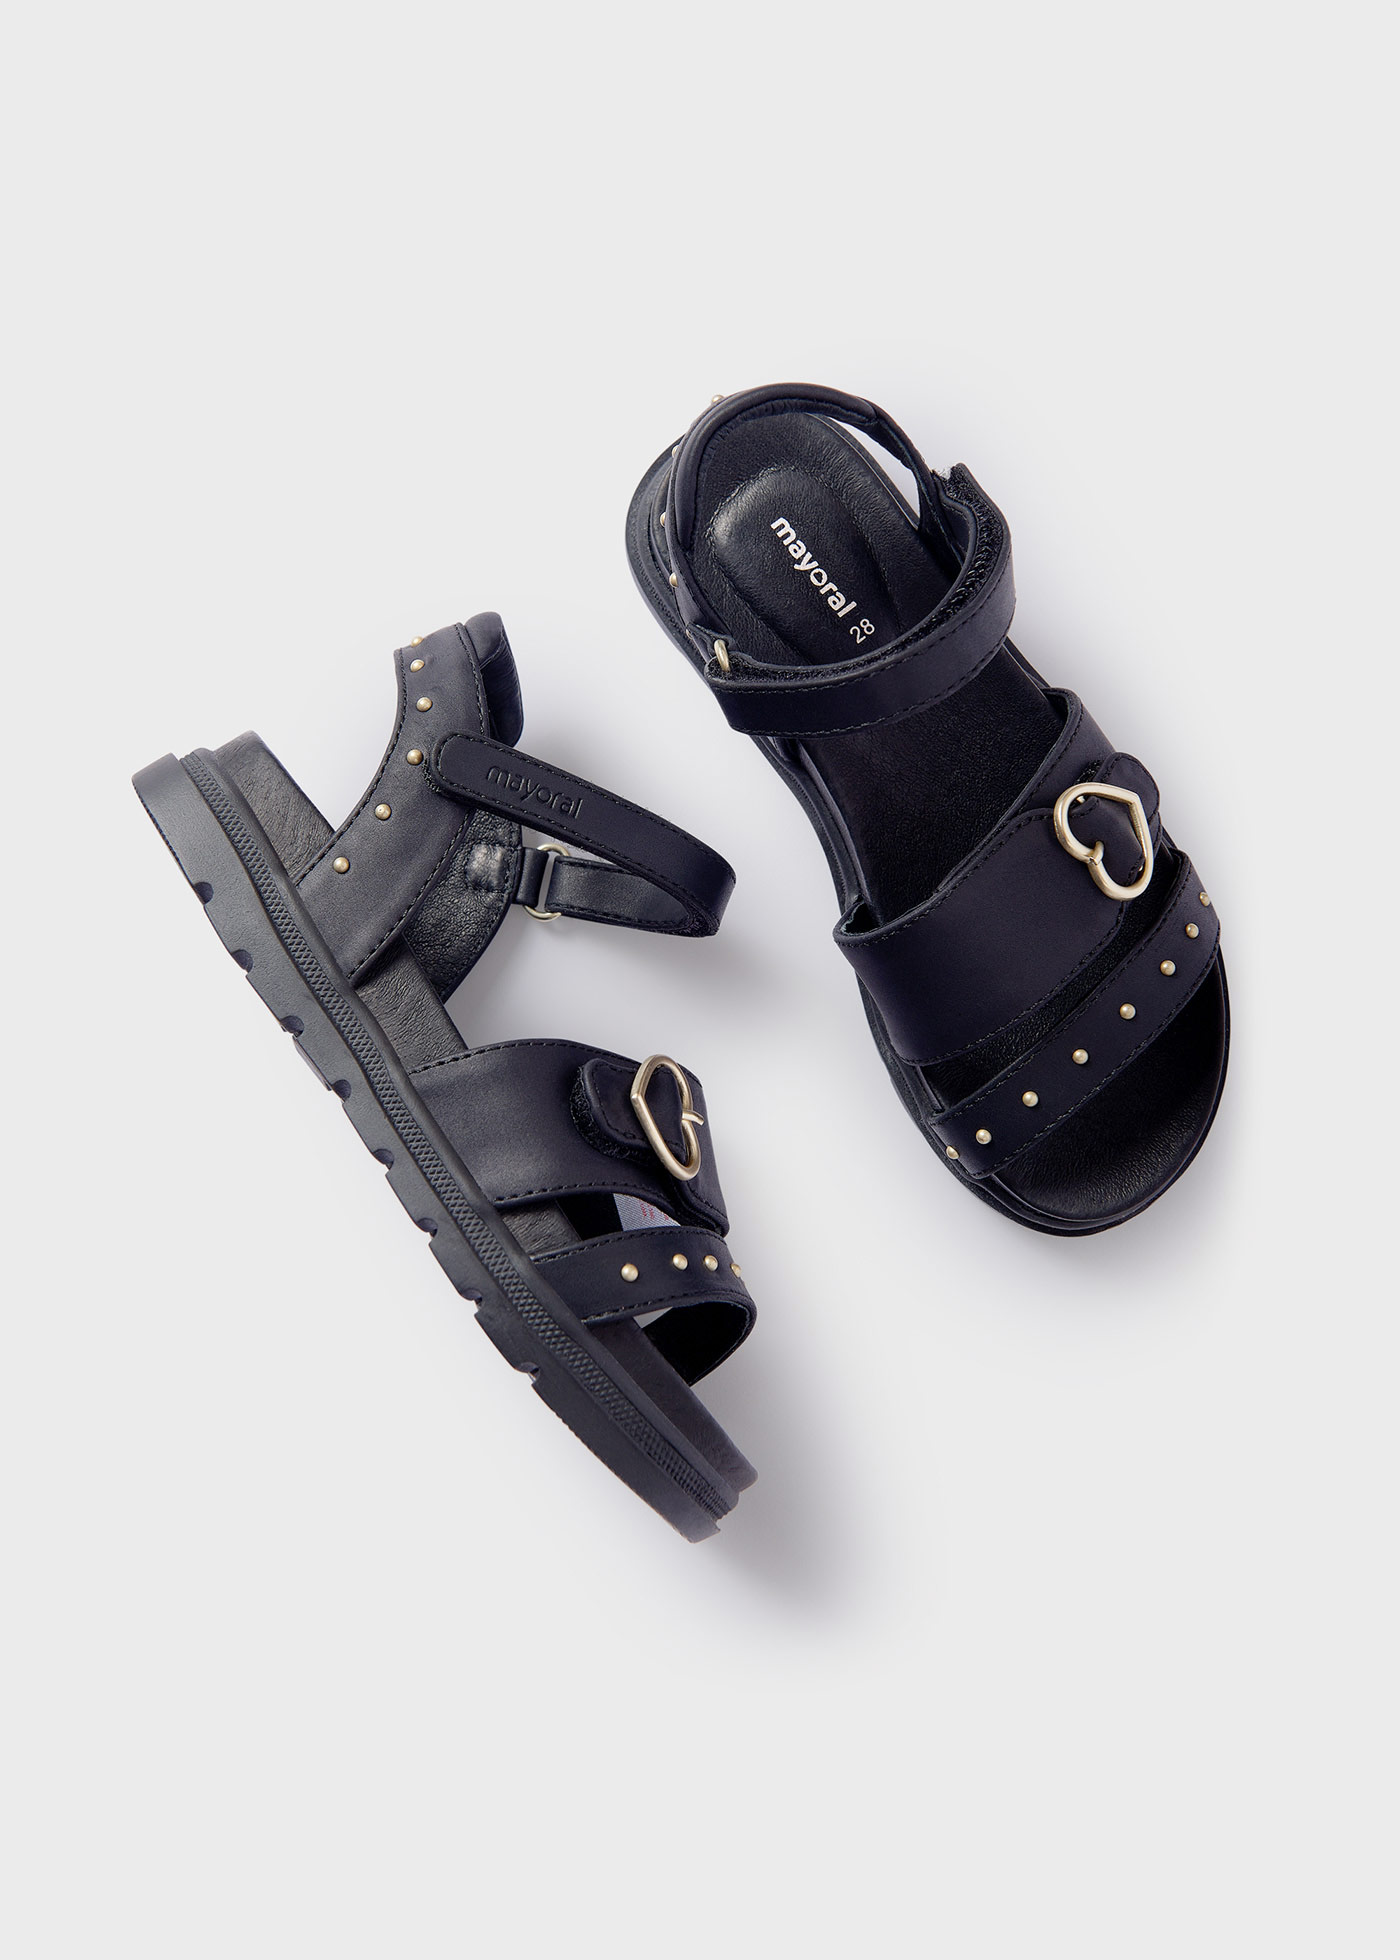 Girls studs sandals sustainable leather